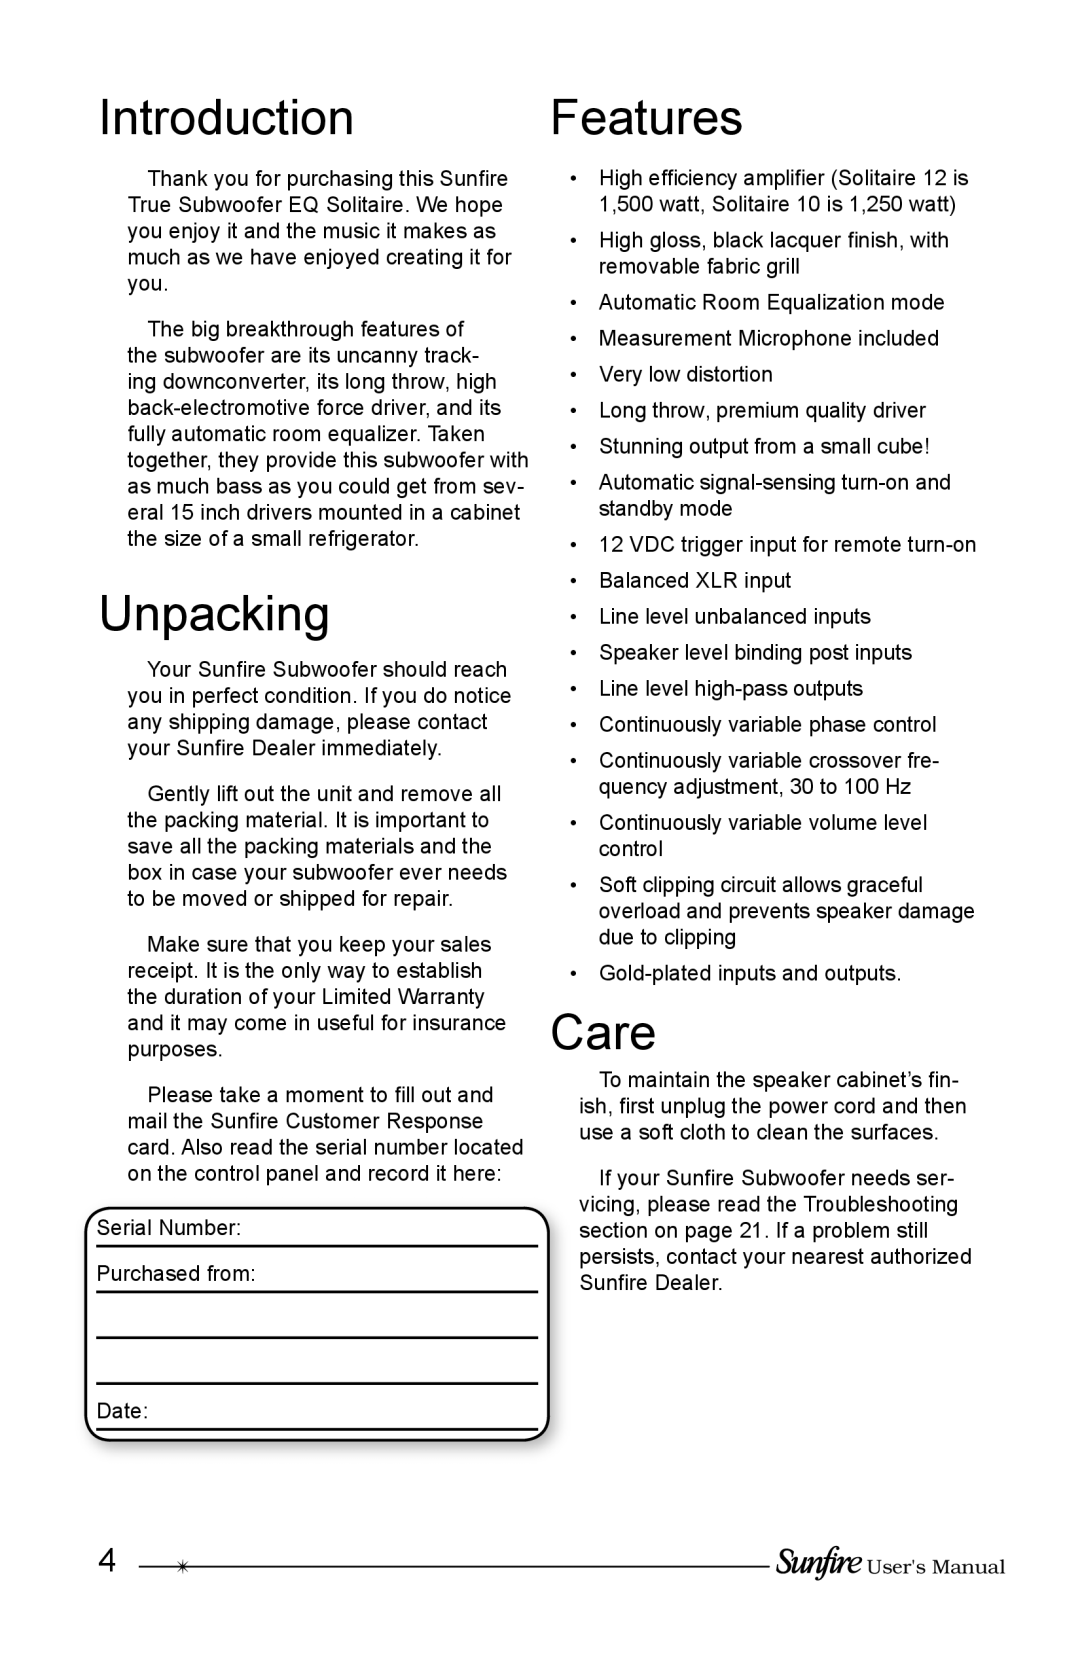 Sunfire Solitaire 10 user manual Introduction Features, Unpacking, Care 